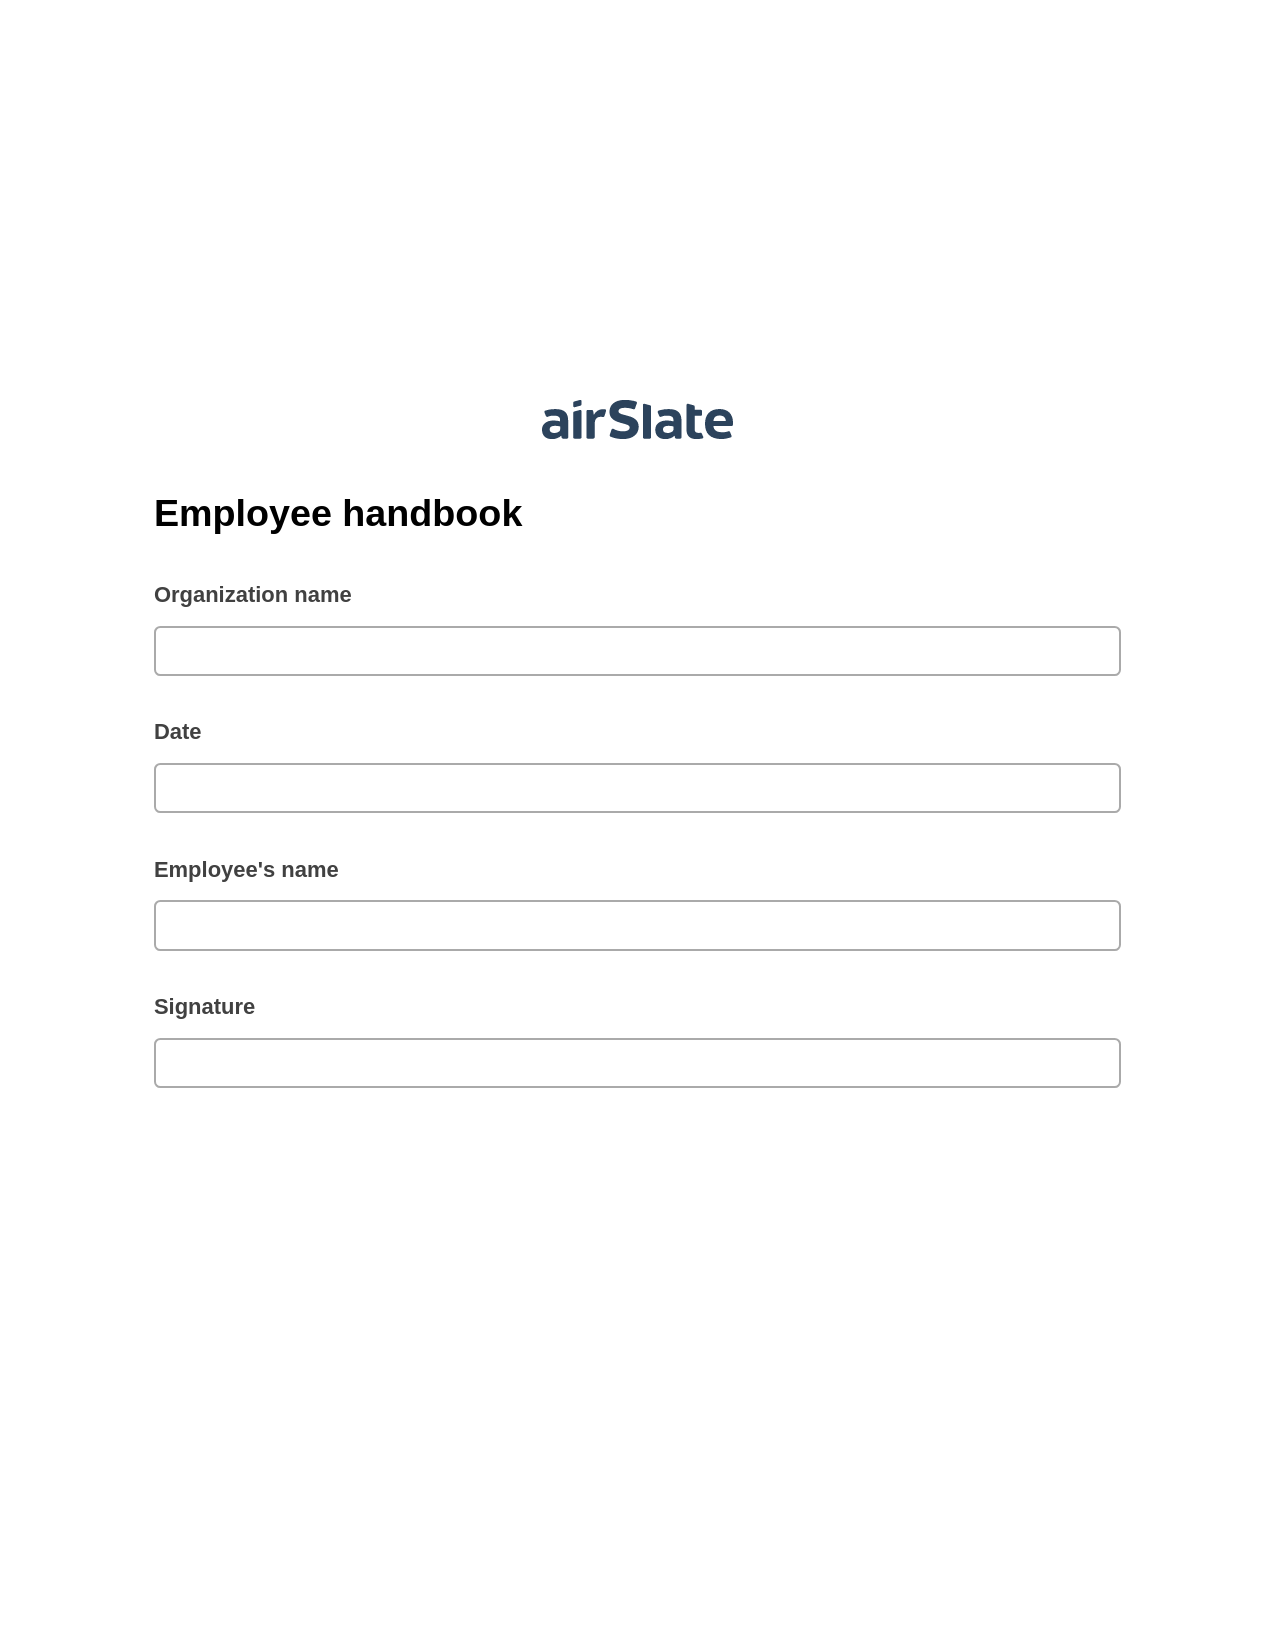 Employee handbook Pre-fill from Litmos bot, Email Notification Bot, Export to Excel 365 Bot